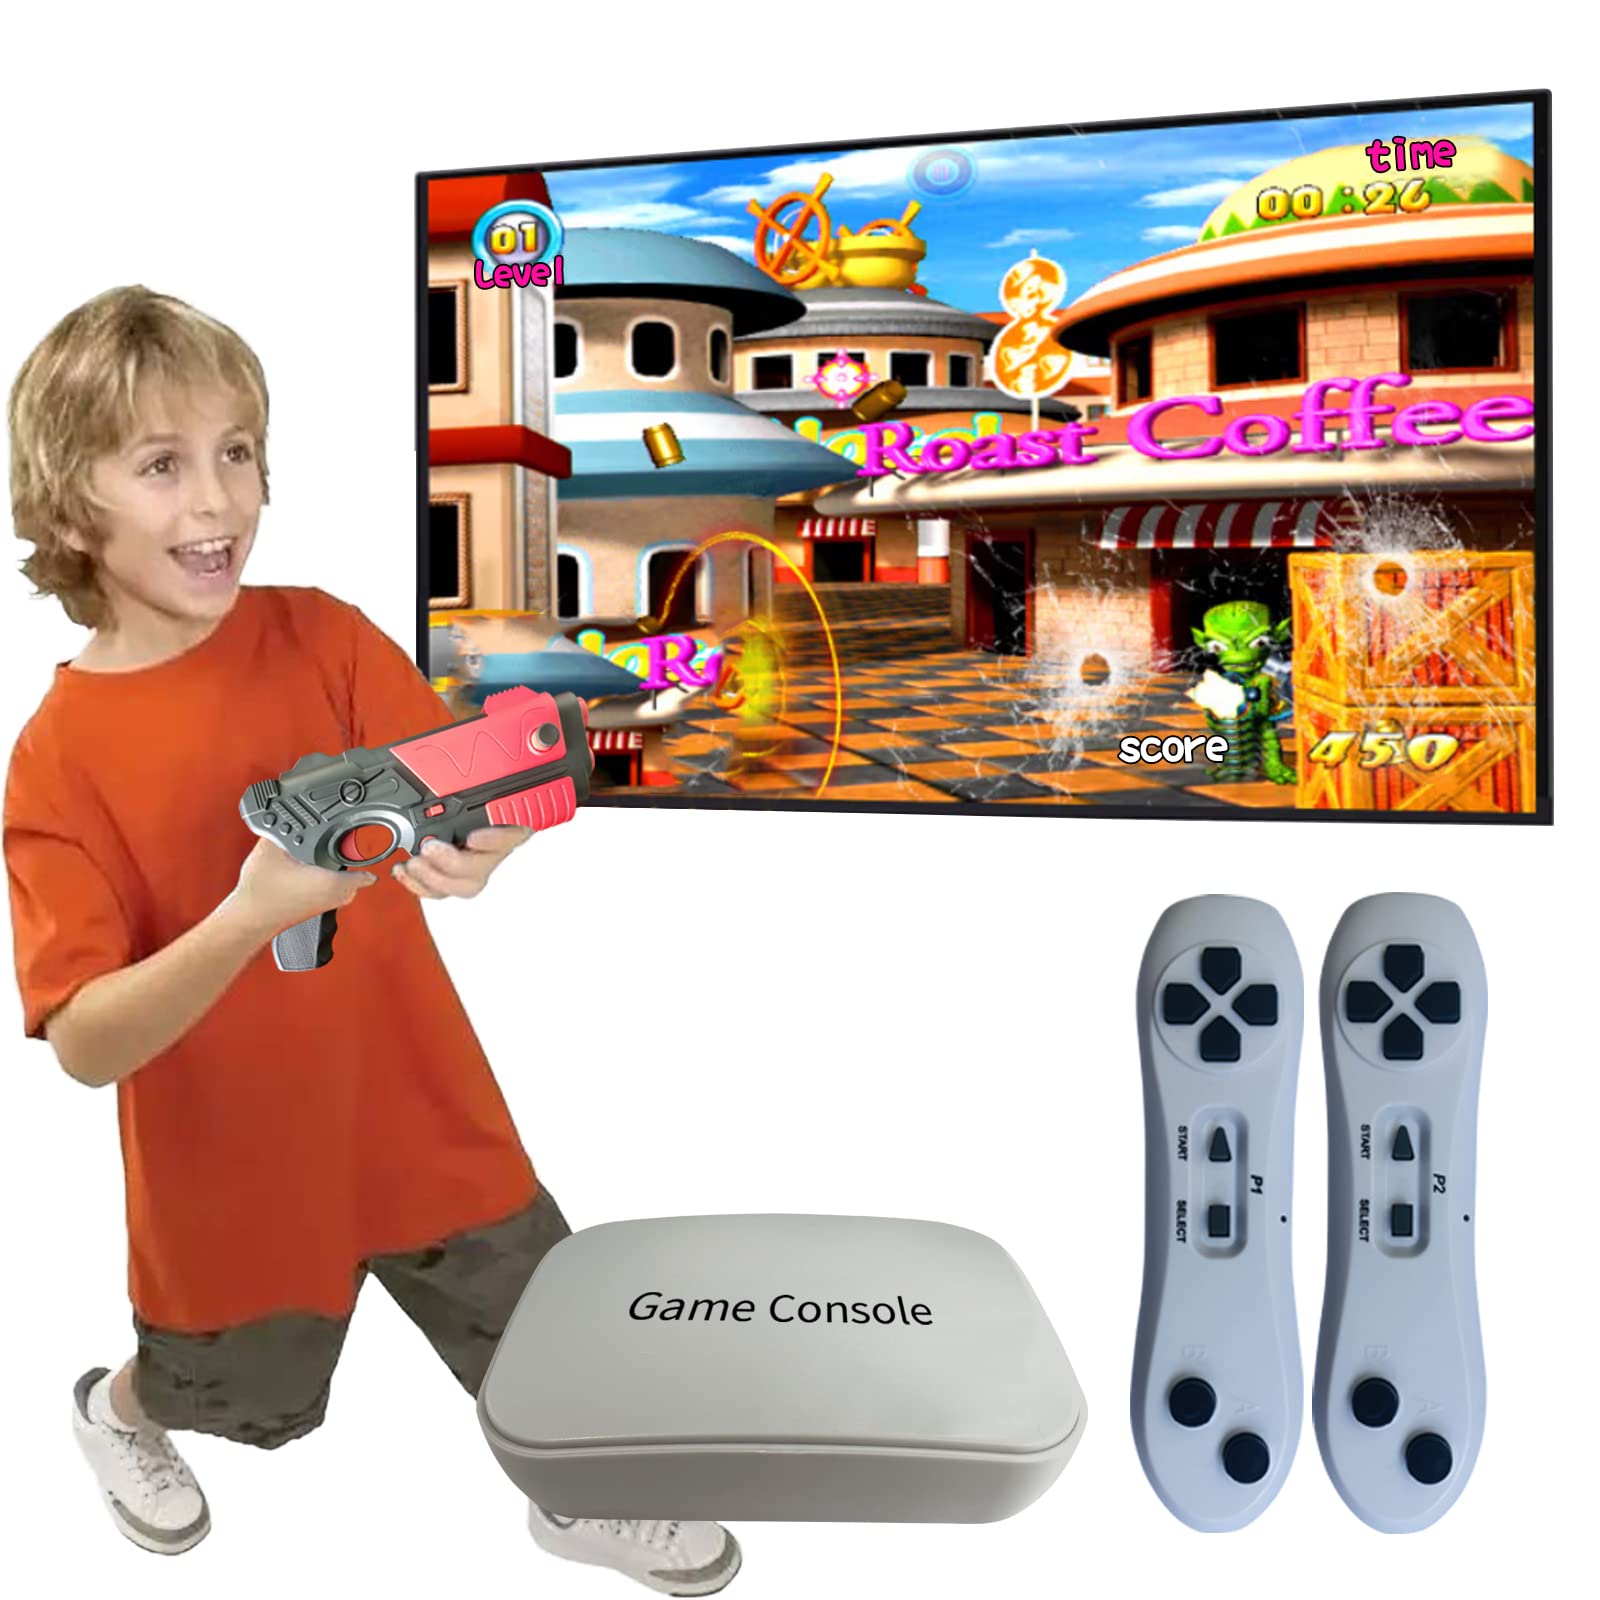 Damcoola Game Console with 900+ Games, TV Retro Video Game Console for Kids & Adults, Game Box with AR Gun Games,2 Handheld Wireless Game Controllers, Plug& Play, Toy Gift for Boys and Girls age 3 +